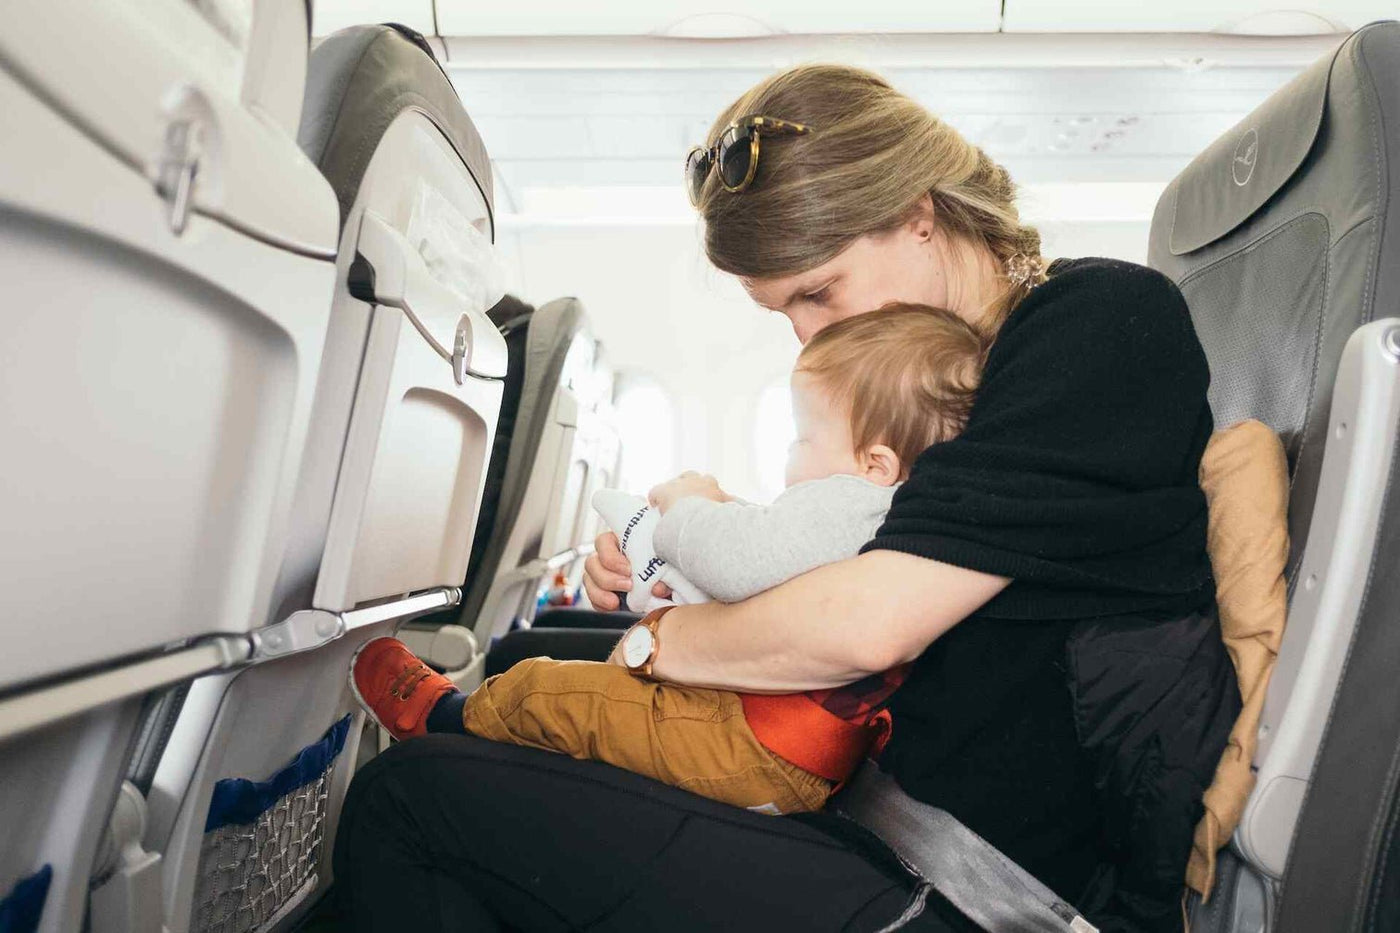 parent traveling with a baby in a plane